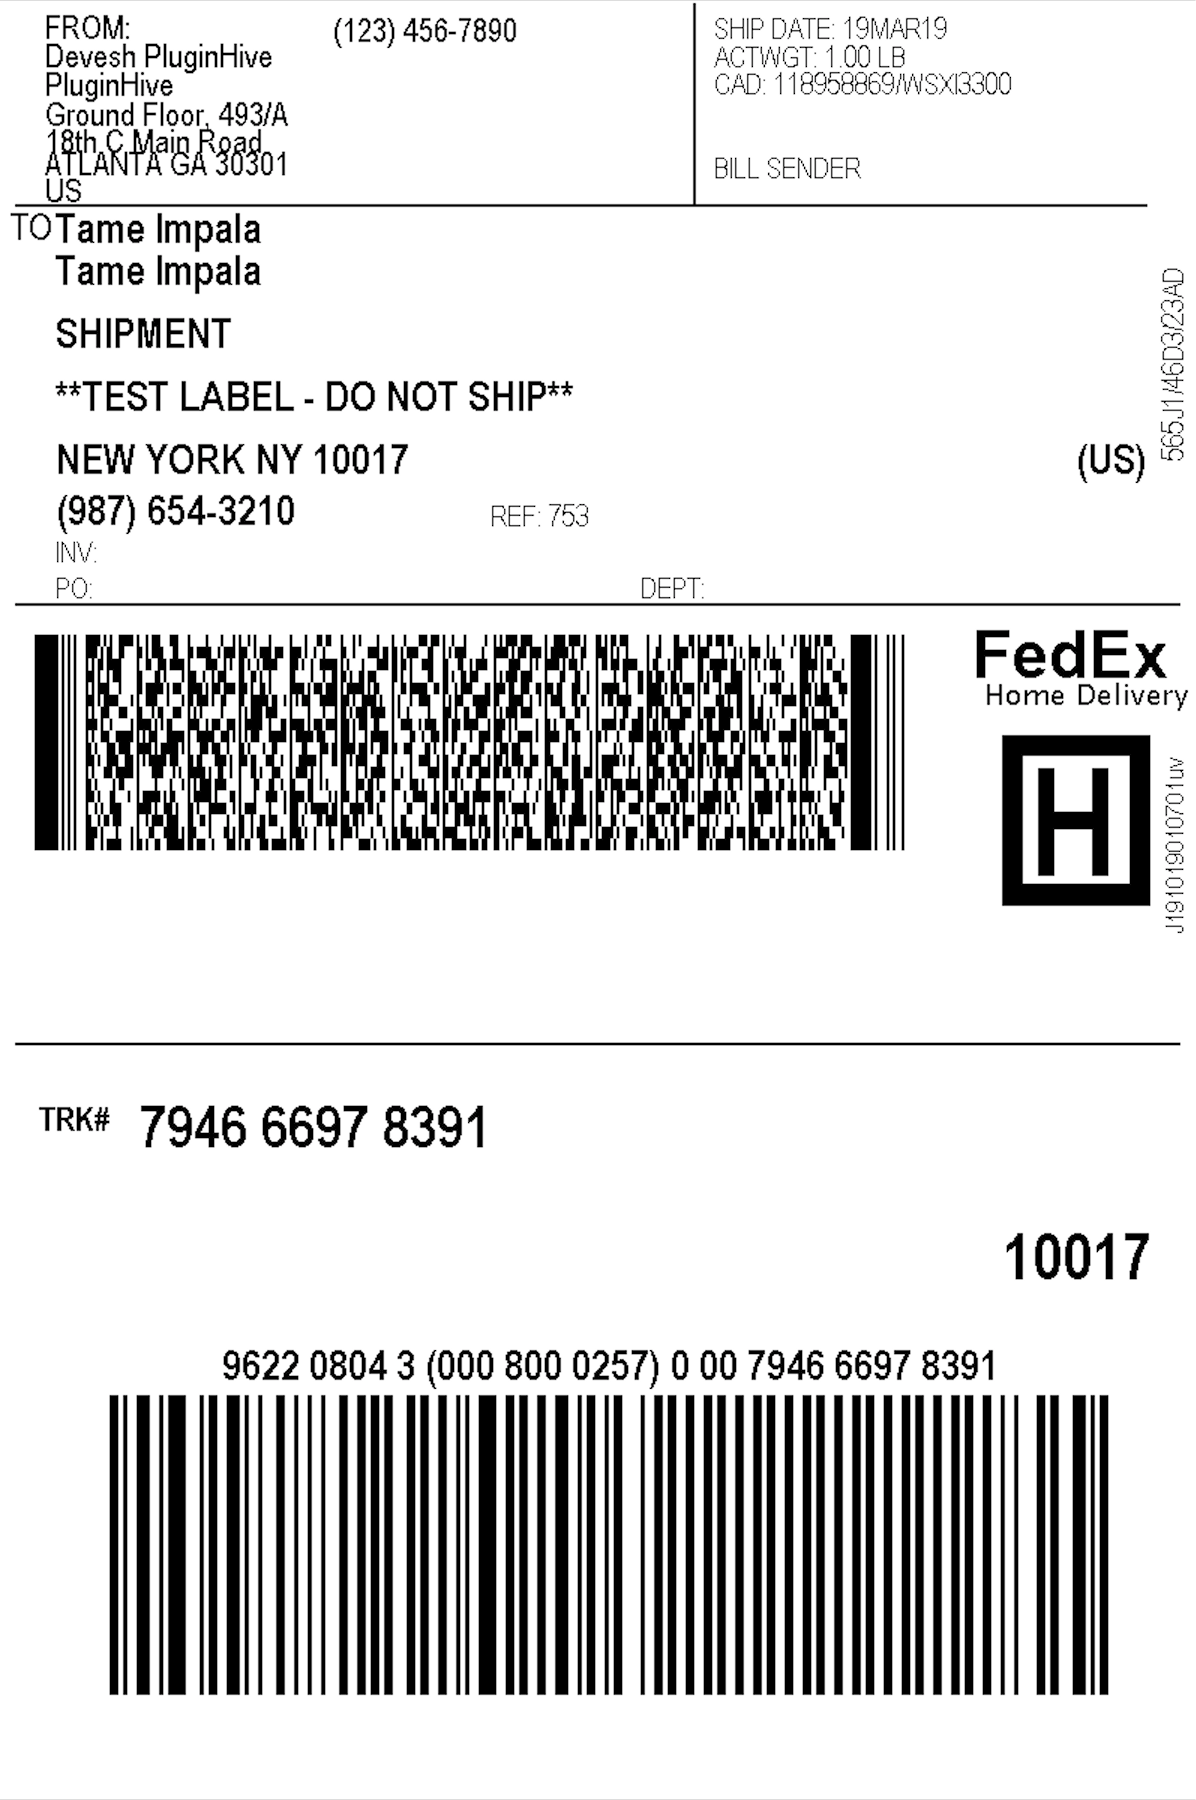 fedex ground find package without tracking number